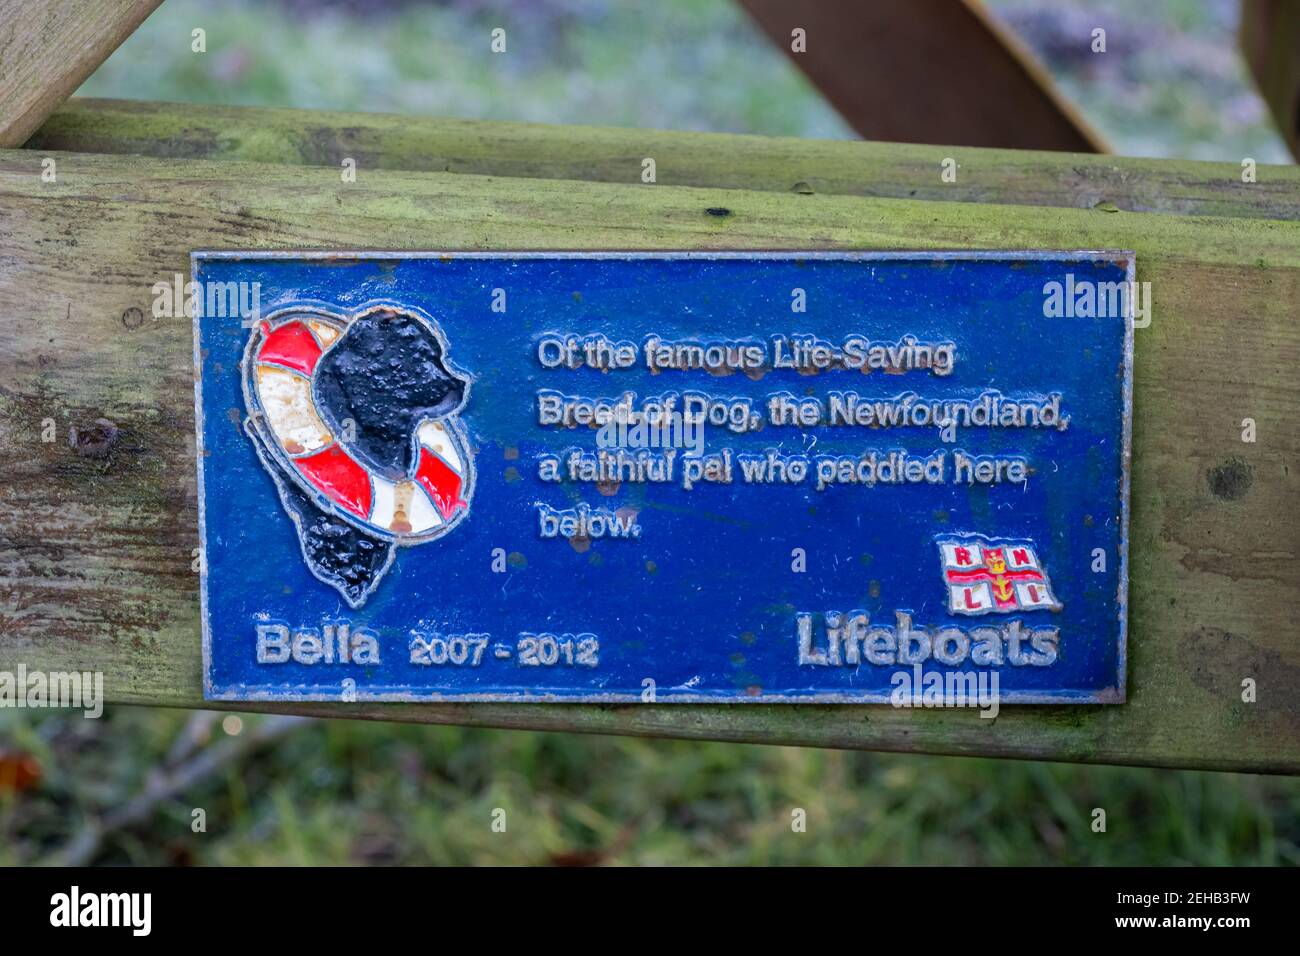 Kirkcudbright, Scotland - 28th December 2020: RNLI Pet memorial plaque for a dog on a wooden bench Stock Photo